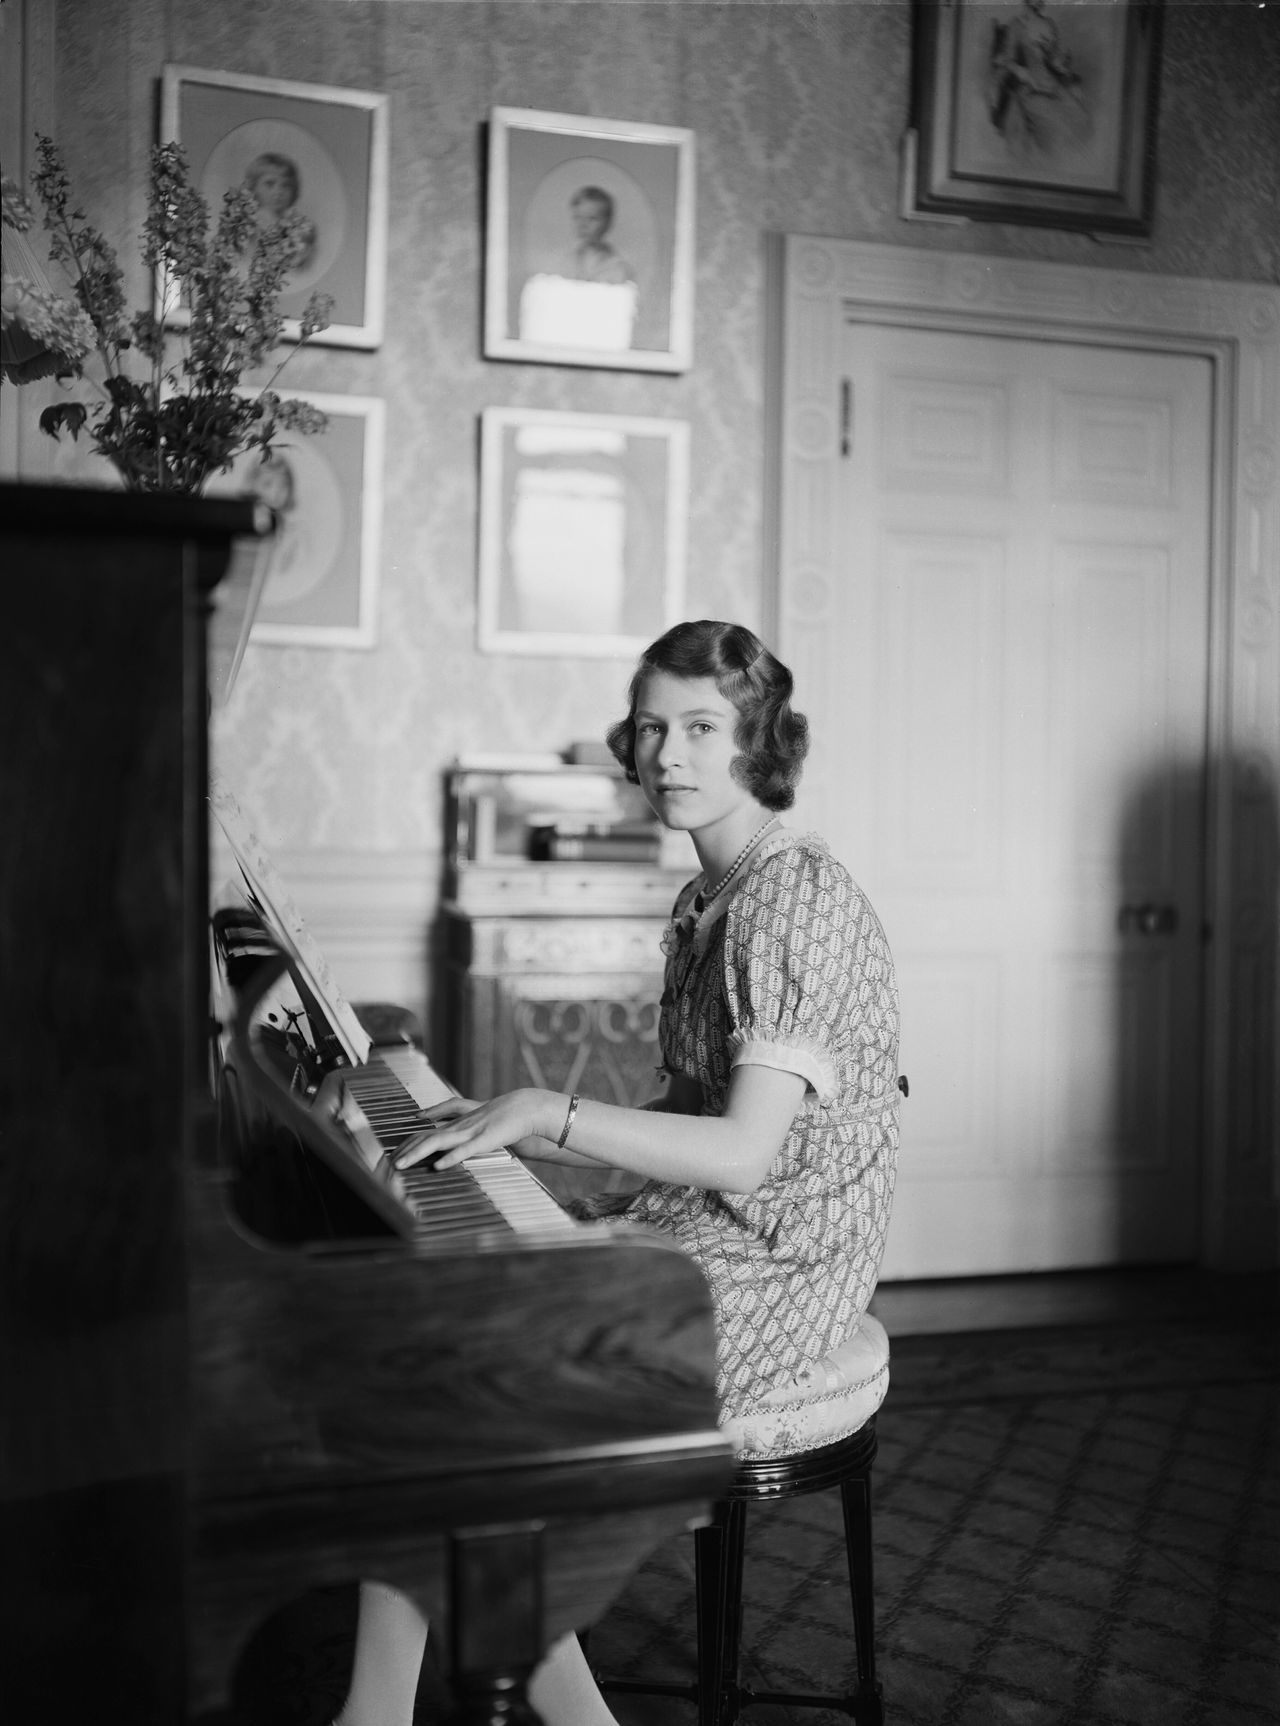 Princess Elizabeth playing a piano at Windsor Castle in 1940.